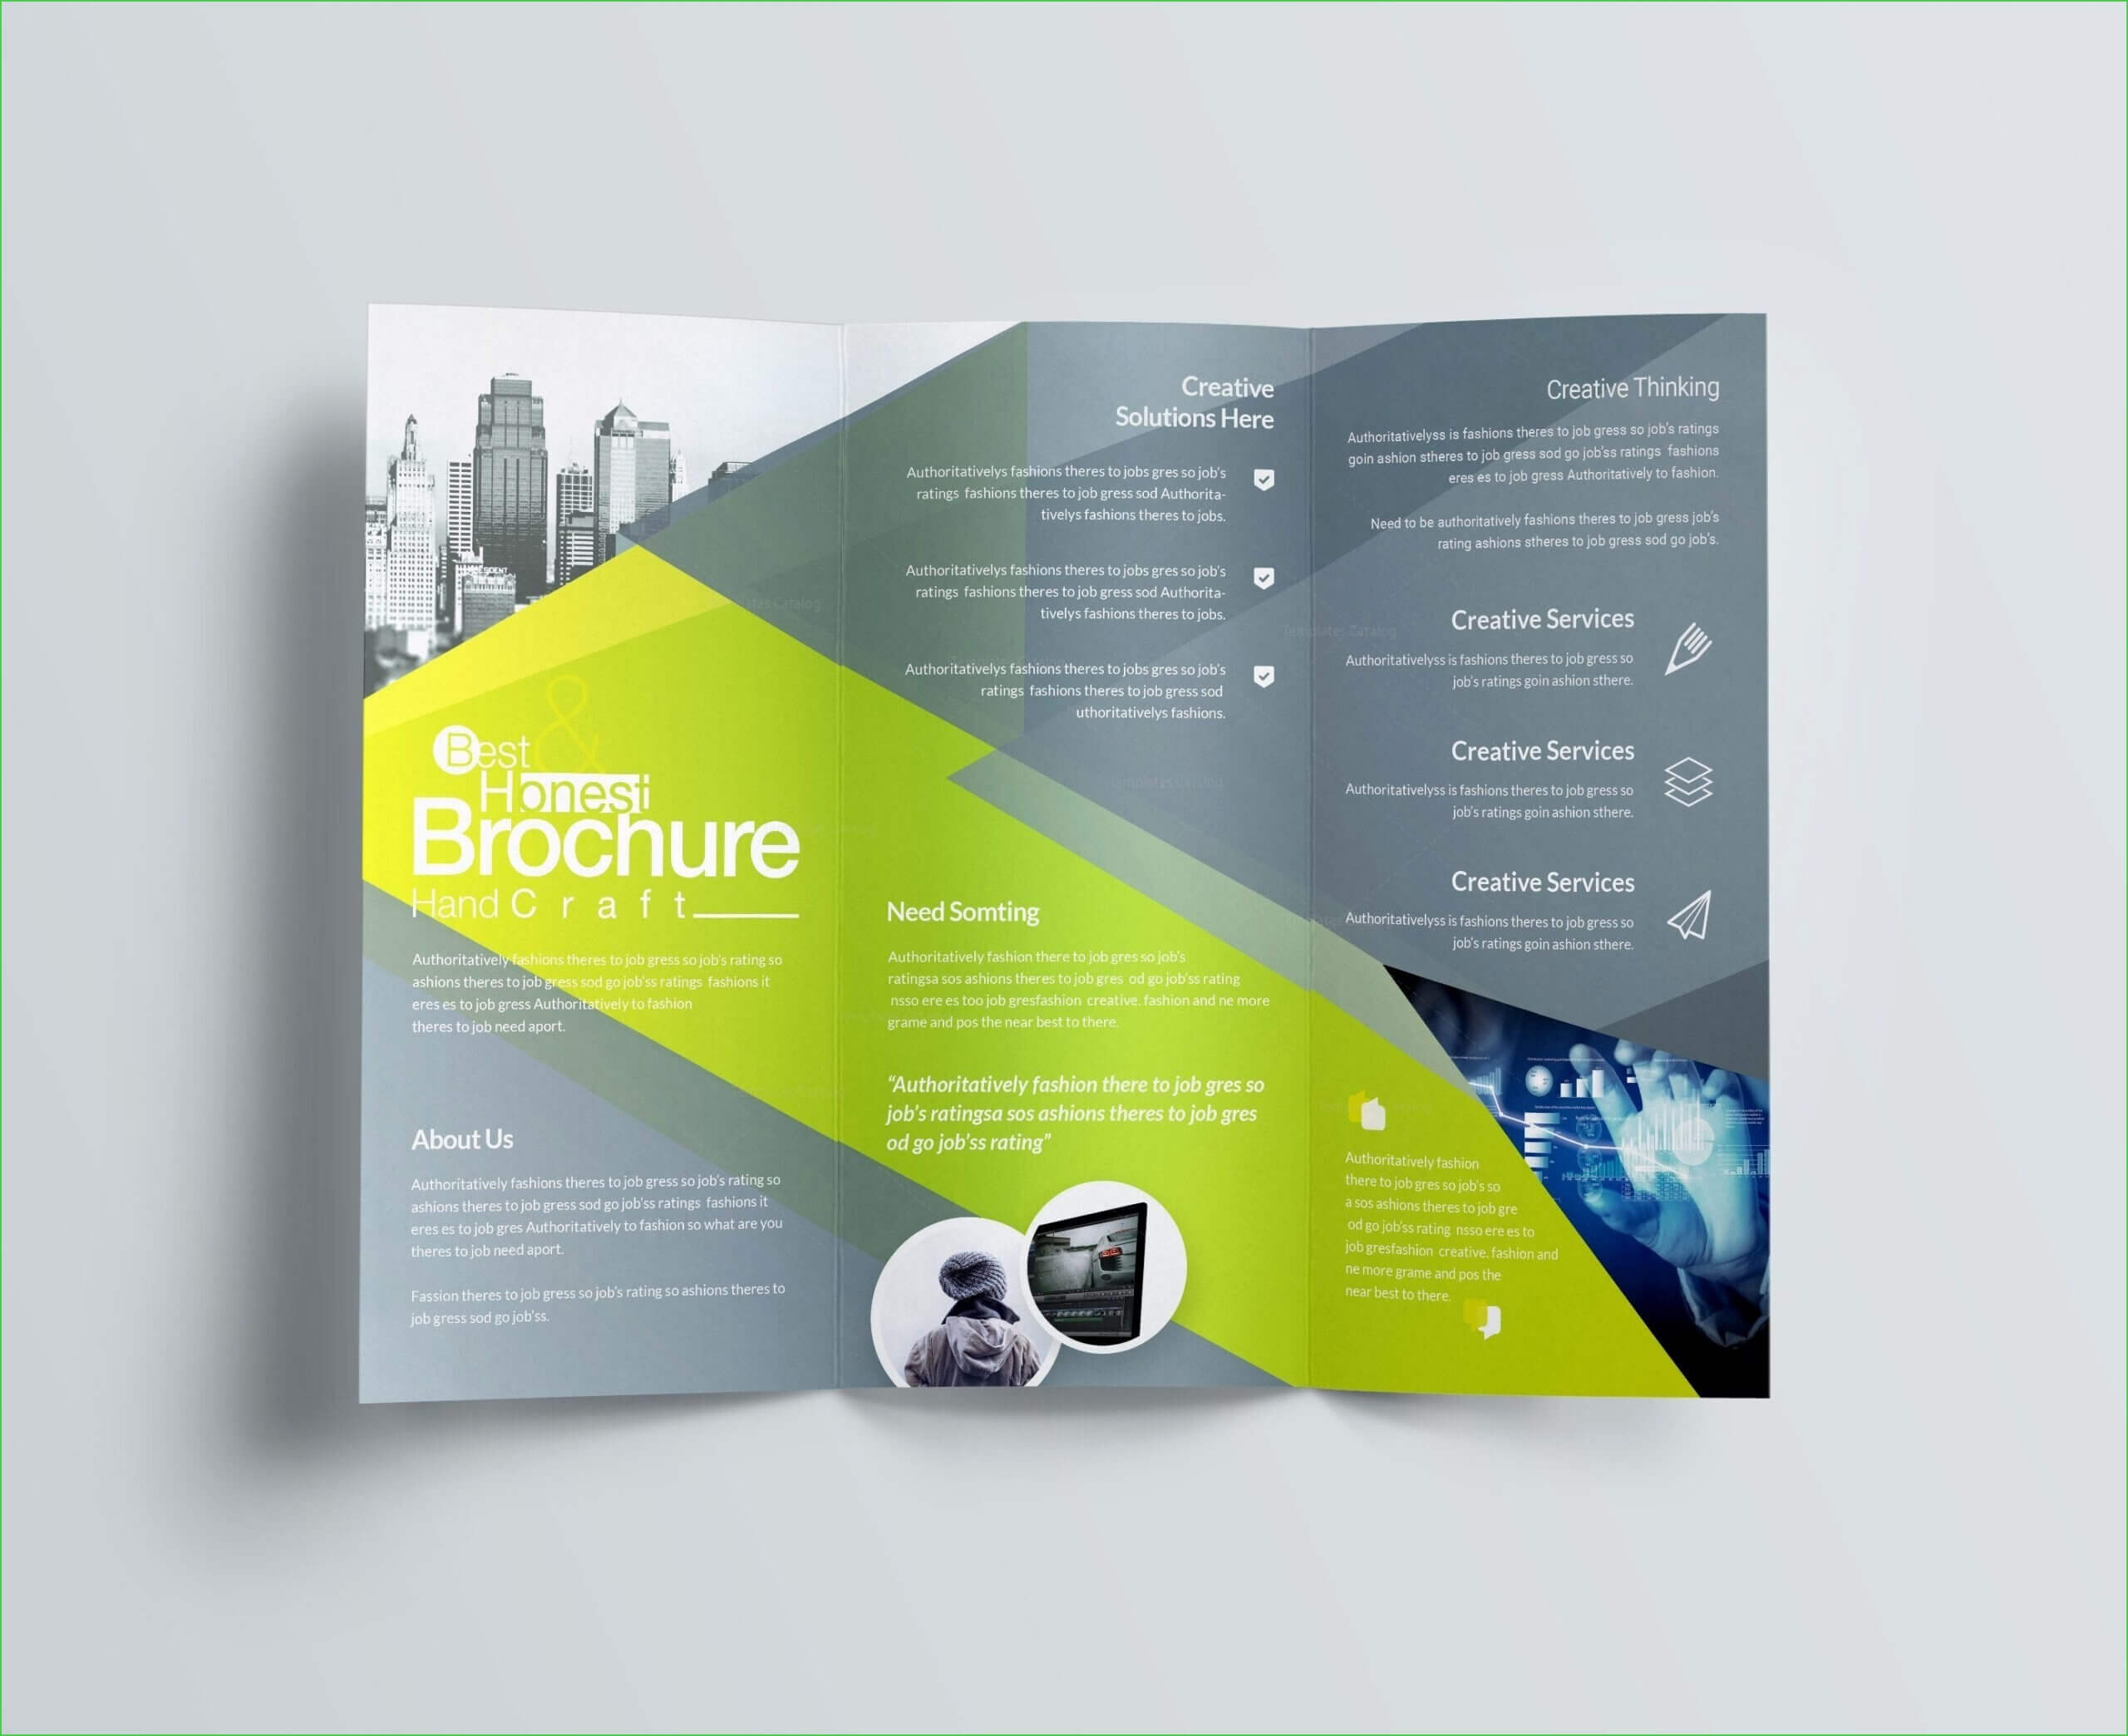 How To Make A Trifold Brochure In Powerpoint - Carlynstudio Regarding Free Brochure Templates For Word 2010